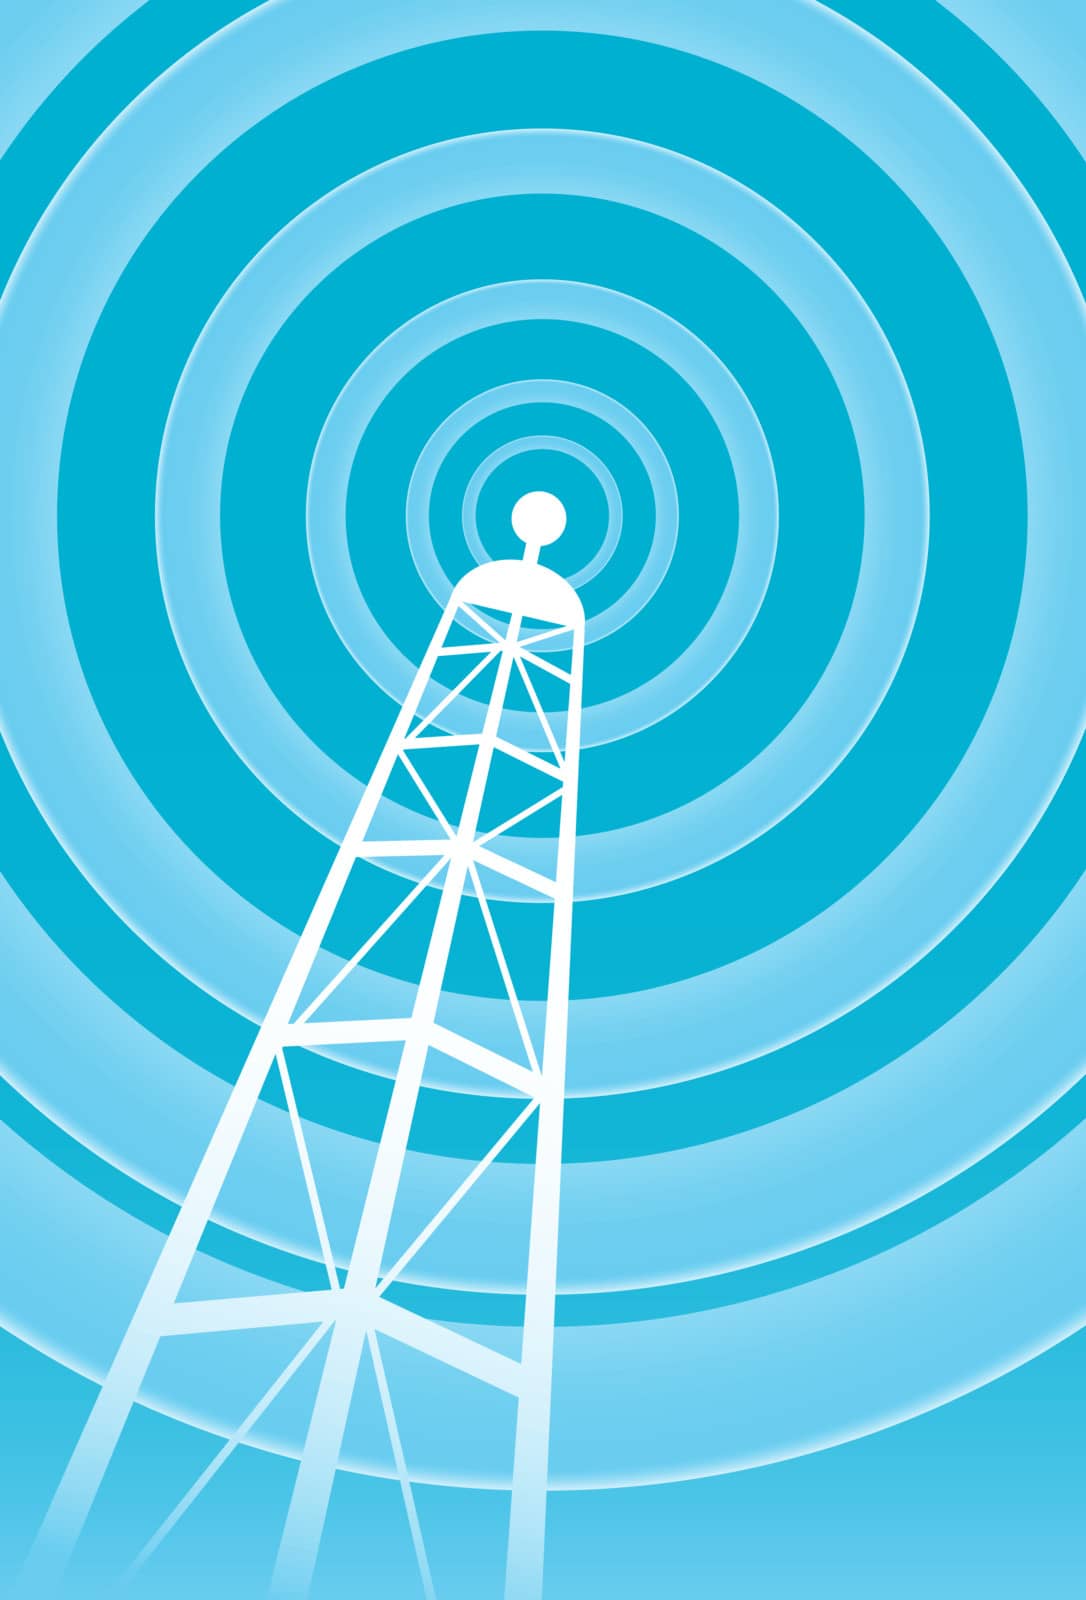 An image of a transmitting tower.